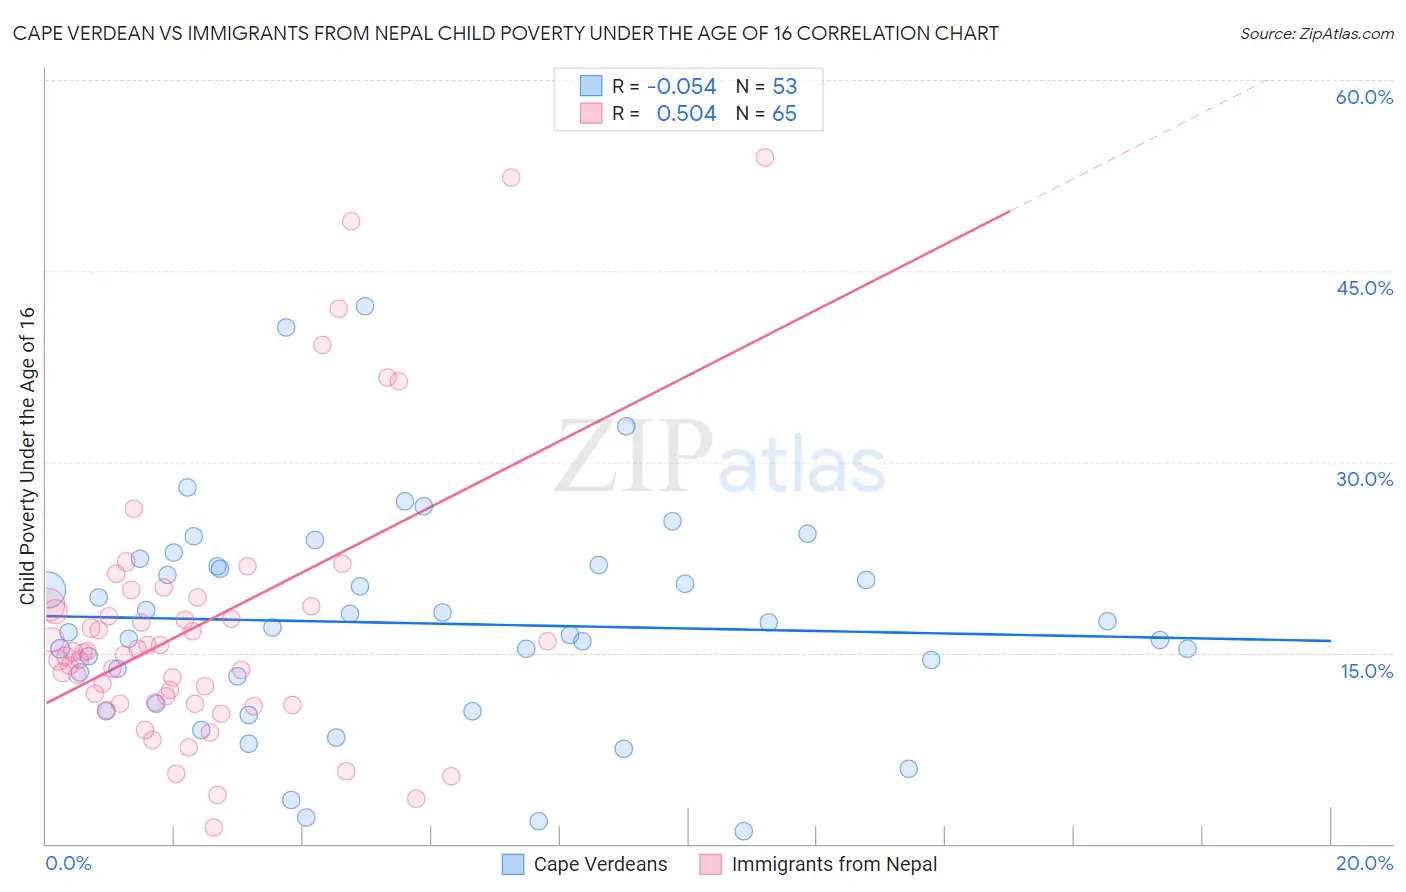 Cape Verdean vs Immigrants from Nepal Child Poverty Under the Age of 16